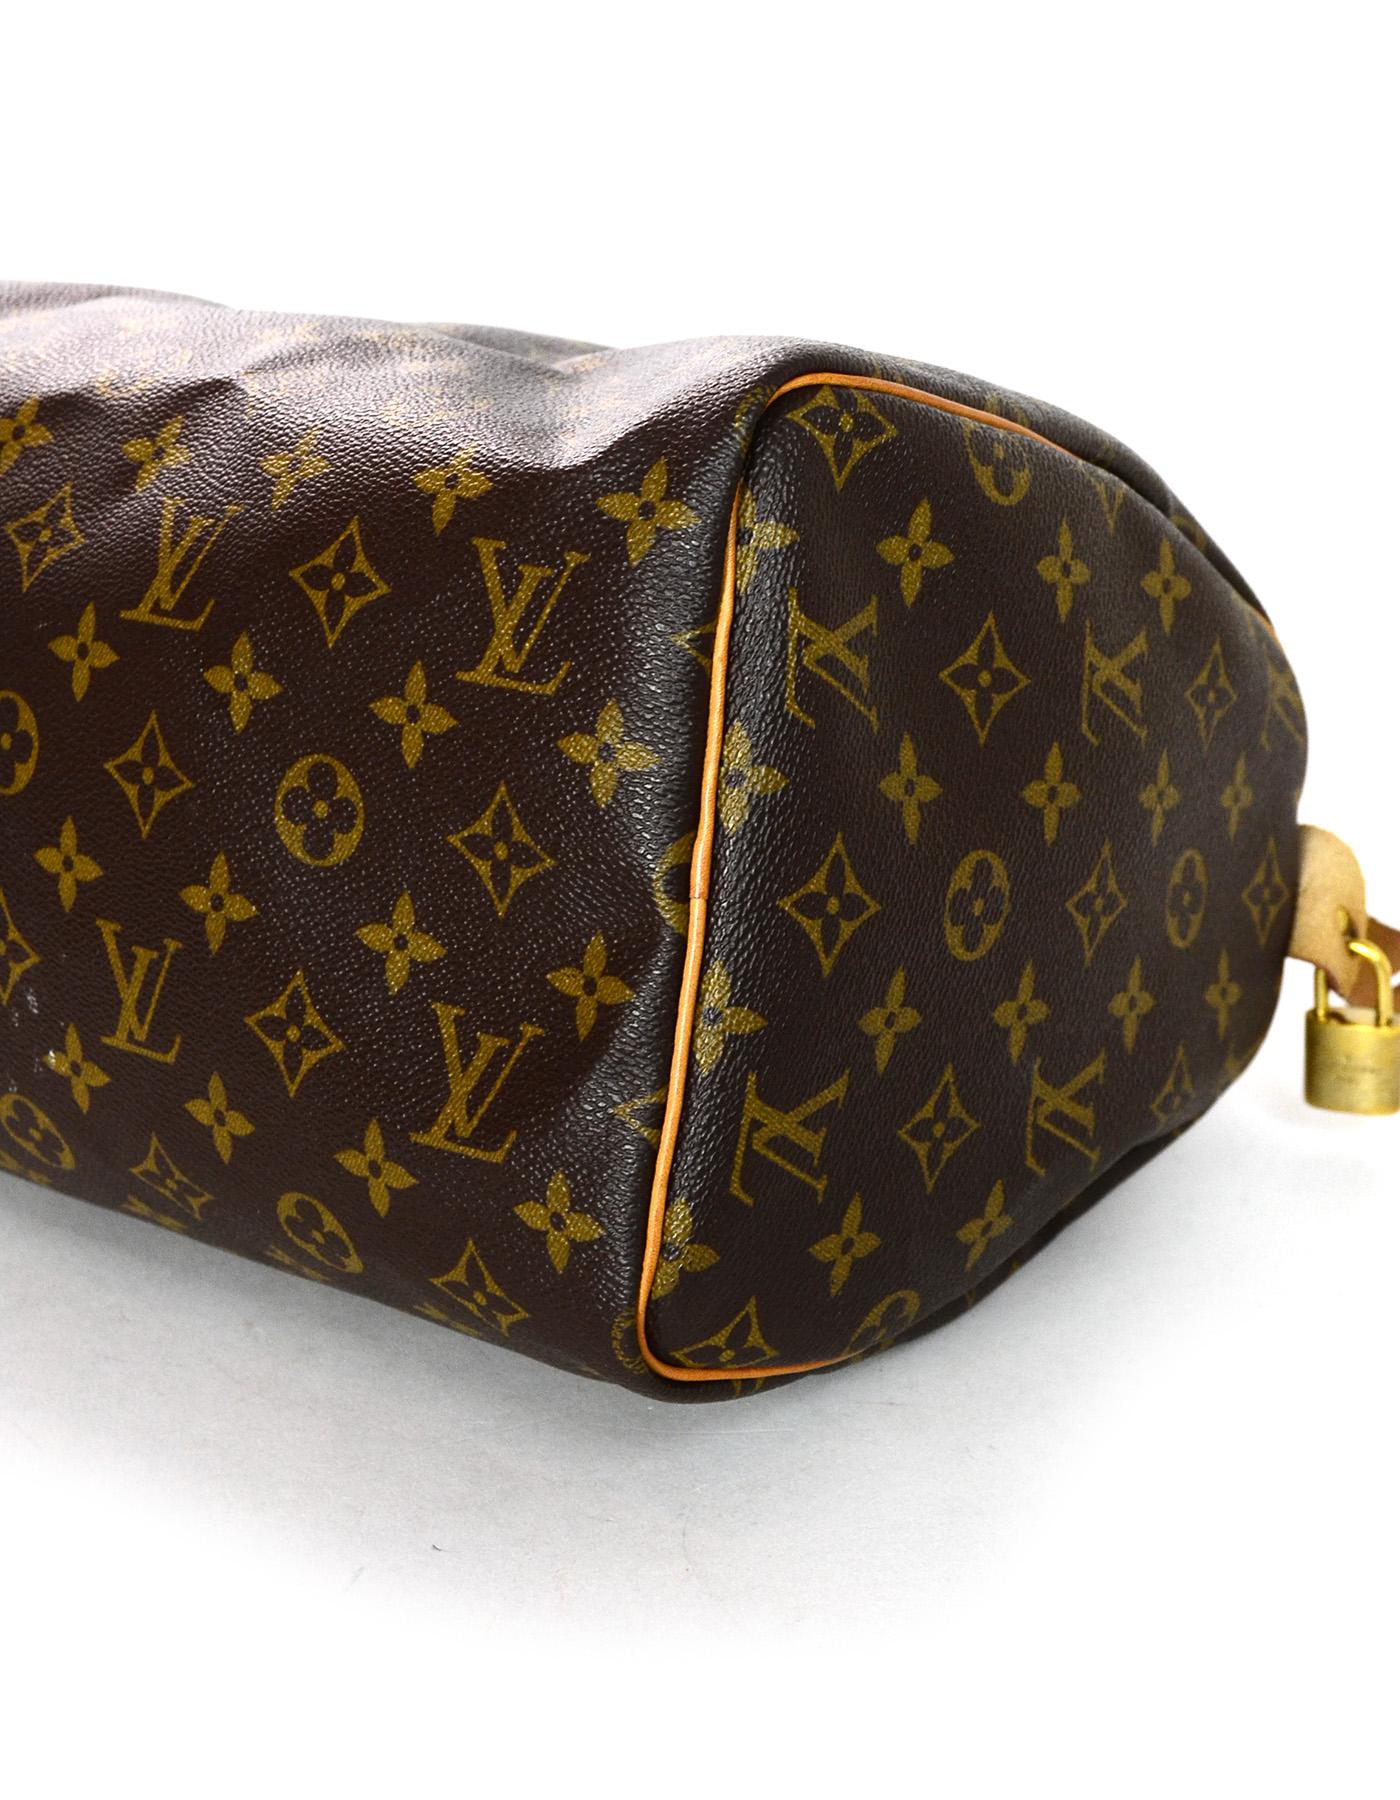 Louis Vuitton LV Monogram Speedy 30 Bag w/ Box and DB In Good Condition In New York, NY